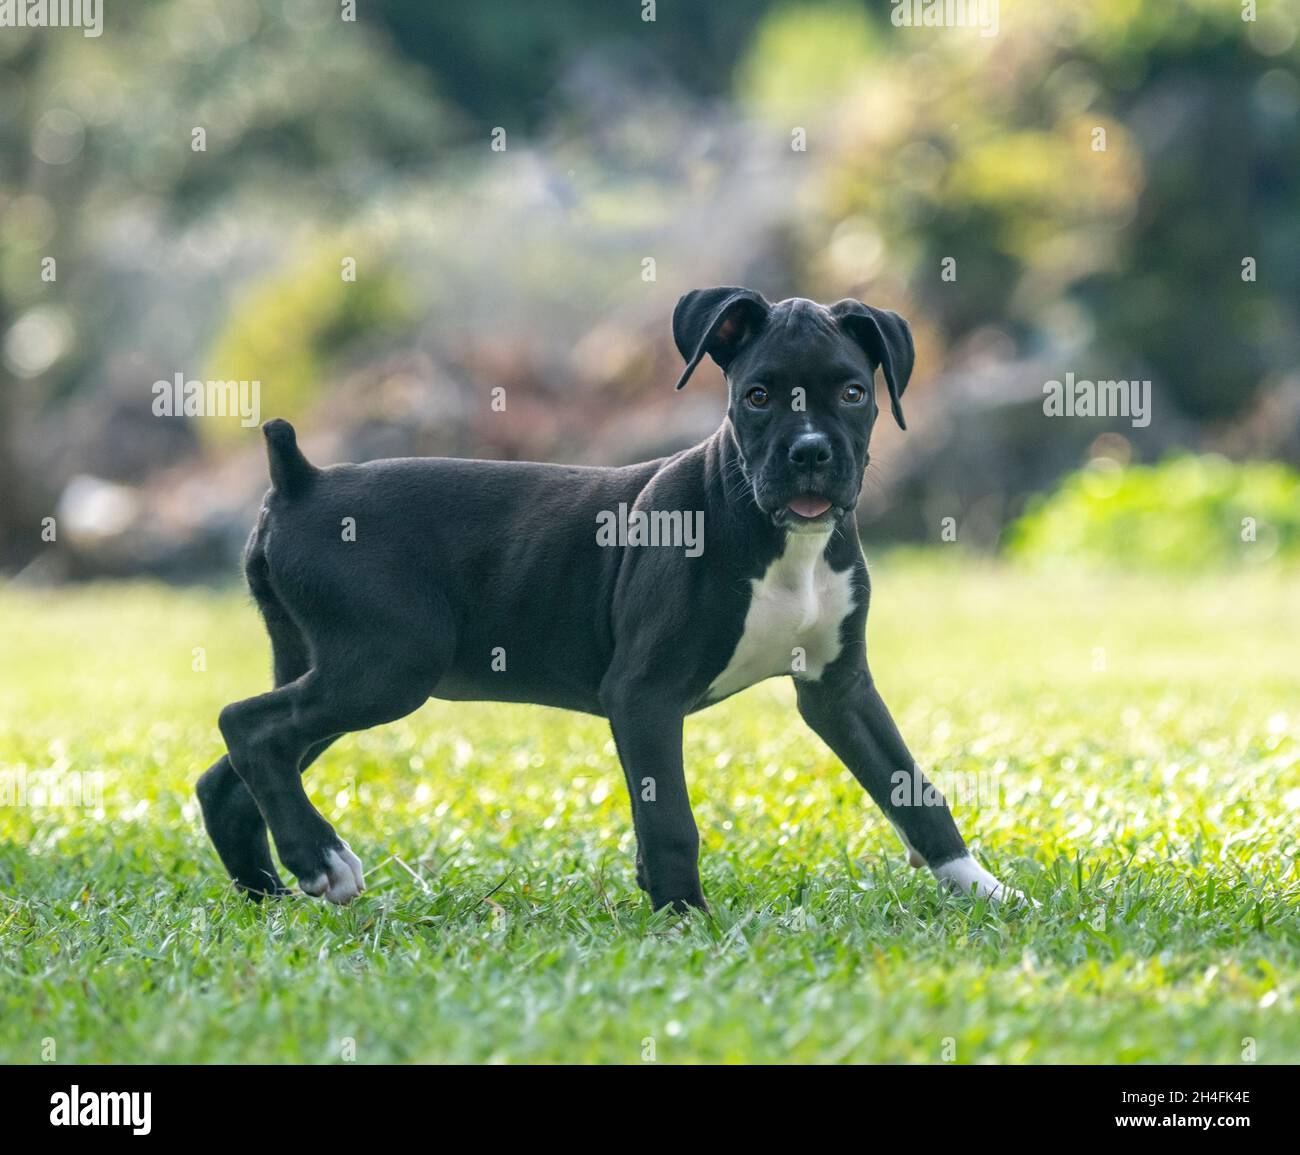 Alert 9 week old black Boxer dog puppy plays on grass lawn Stock Photo -  Alamy